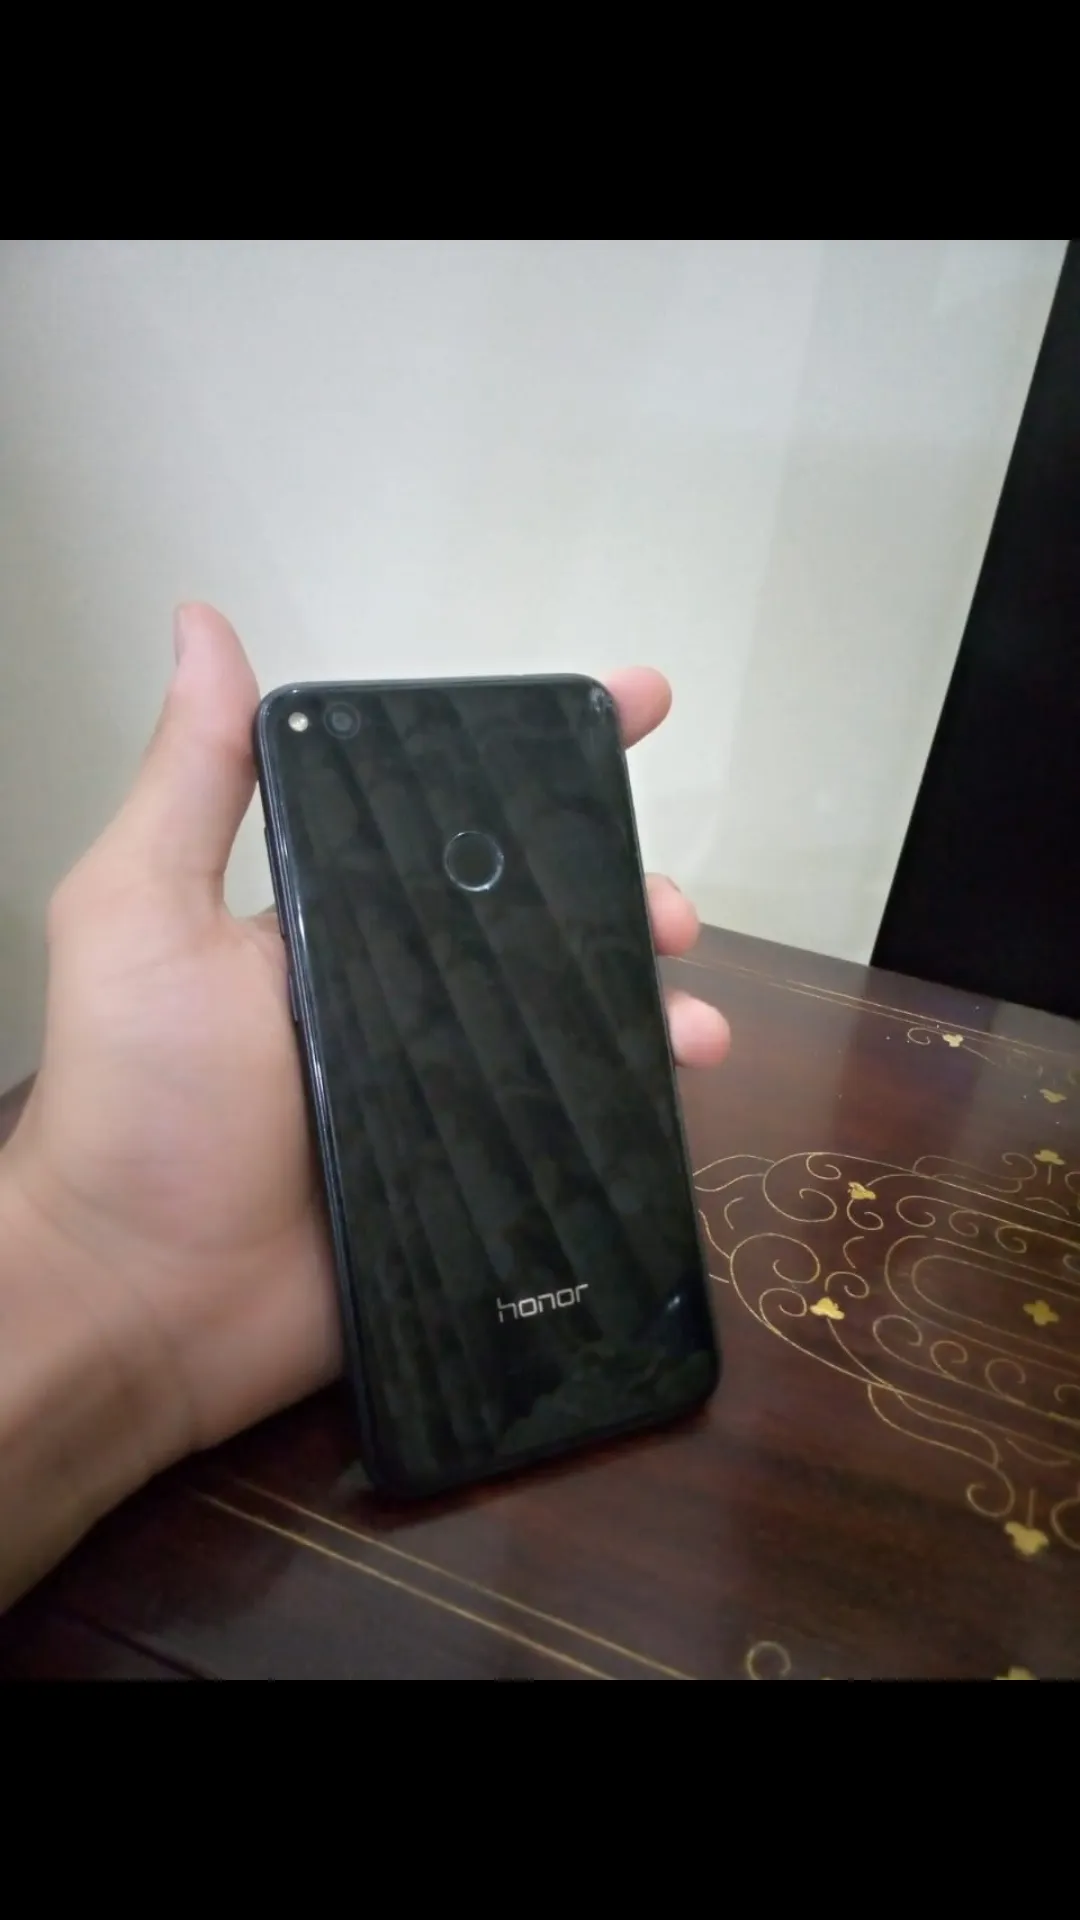 Huawei Honor 8 Lite for sale in perfect working condition - photo 4